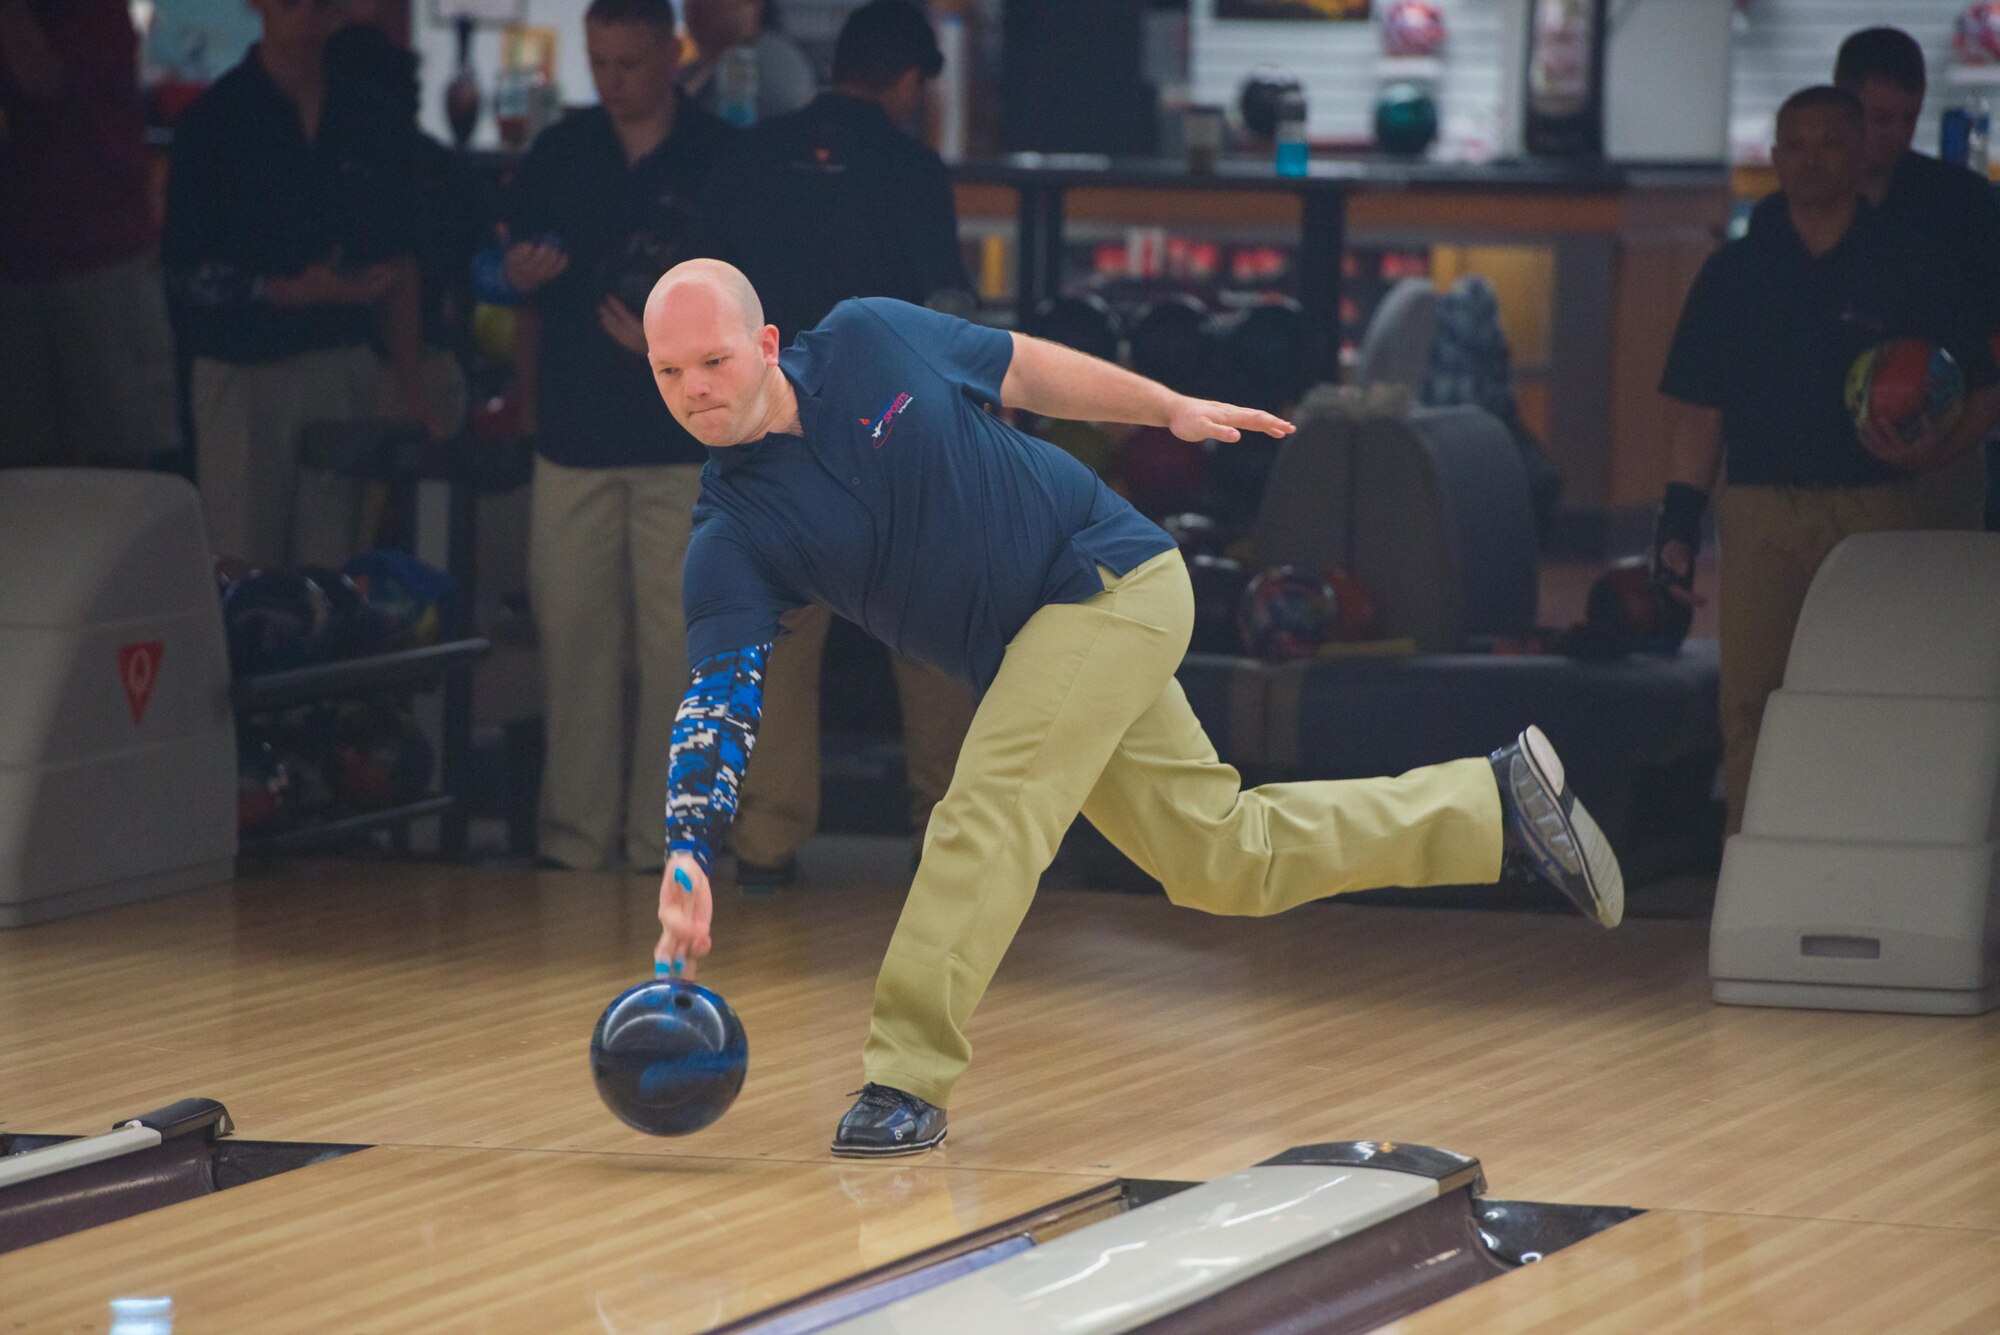 Technical Sergeant Kyle Wilkins, an RC-135 crew chief out of Offutt Air Force Base, Nebraska. warms up at the Armed Forces Bowling Championships at Travis Air Force Base, California (U.S. Air Foce Photo by Louis Briscese)